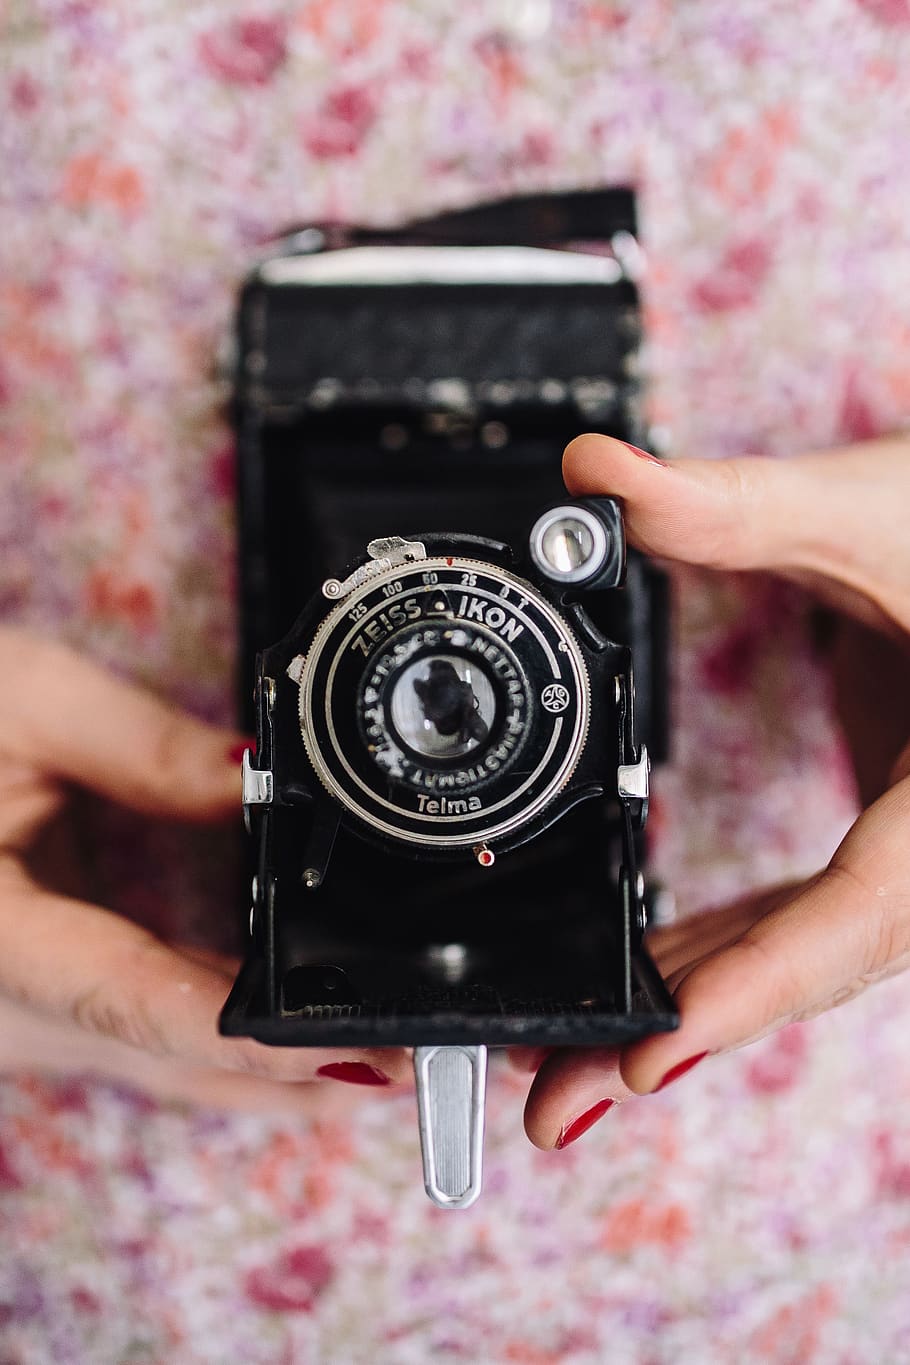 vintage, camera, pink, photography, photographer, hobby, holding, Woman, miscellaneous, items